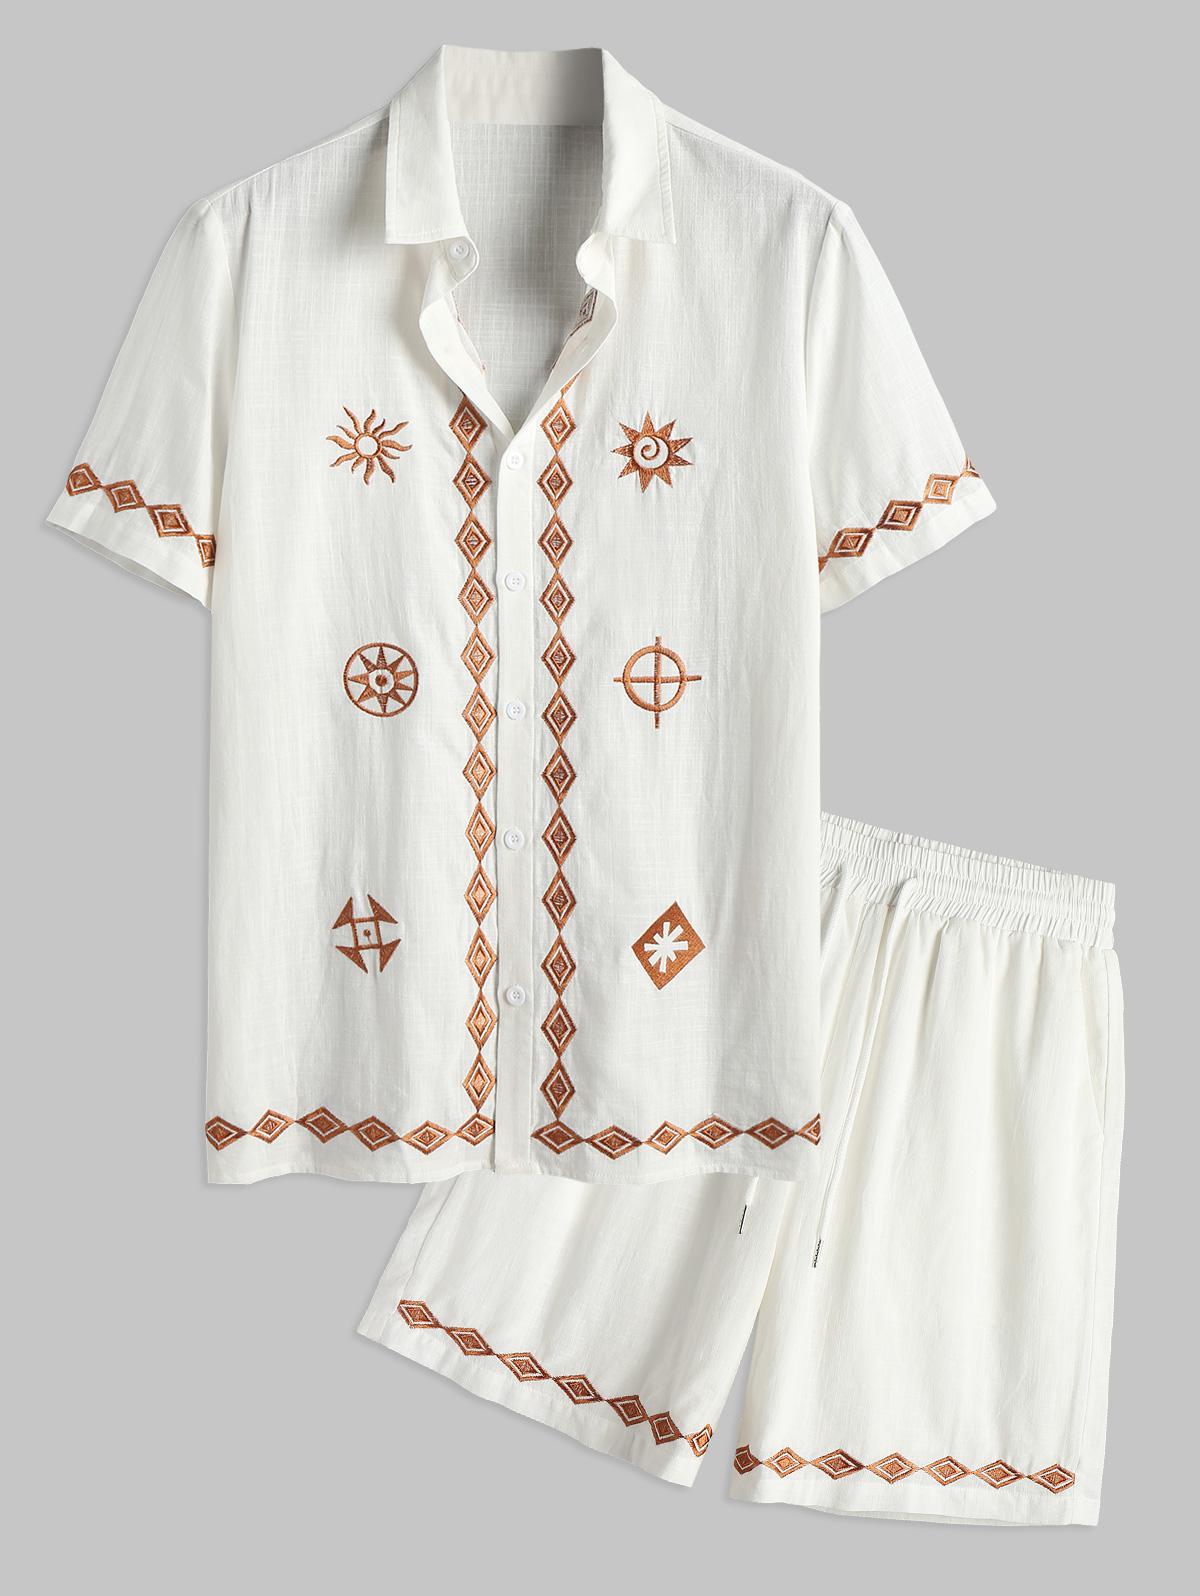 ZAFUL Men's ZAFUL Cotton and Linen Textured Ethnic Printed Geometric Embroidered Shirt and Shorts Set S White